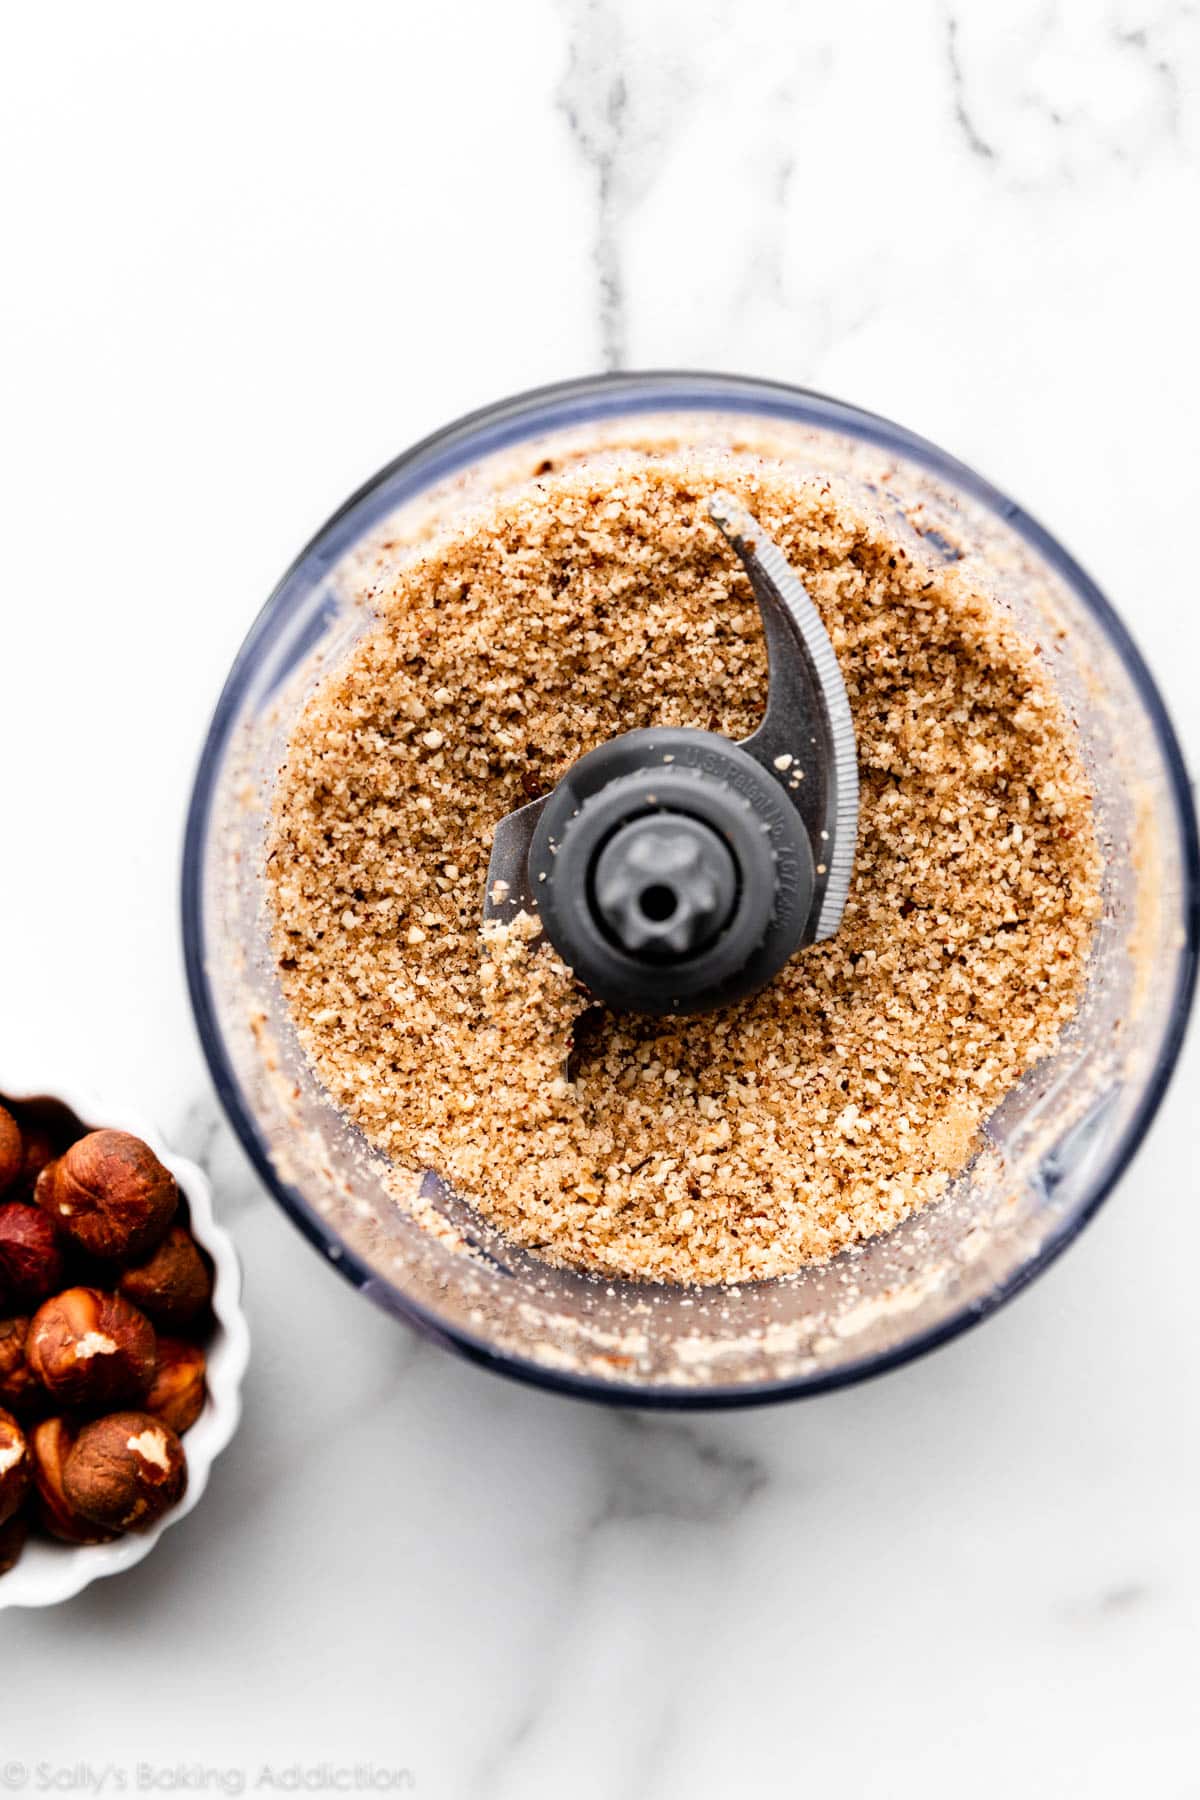 pulsed hazelnut and brown sugar in food processor